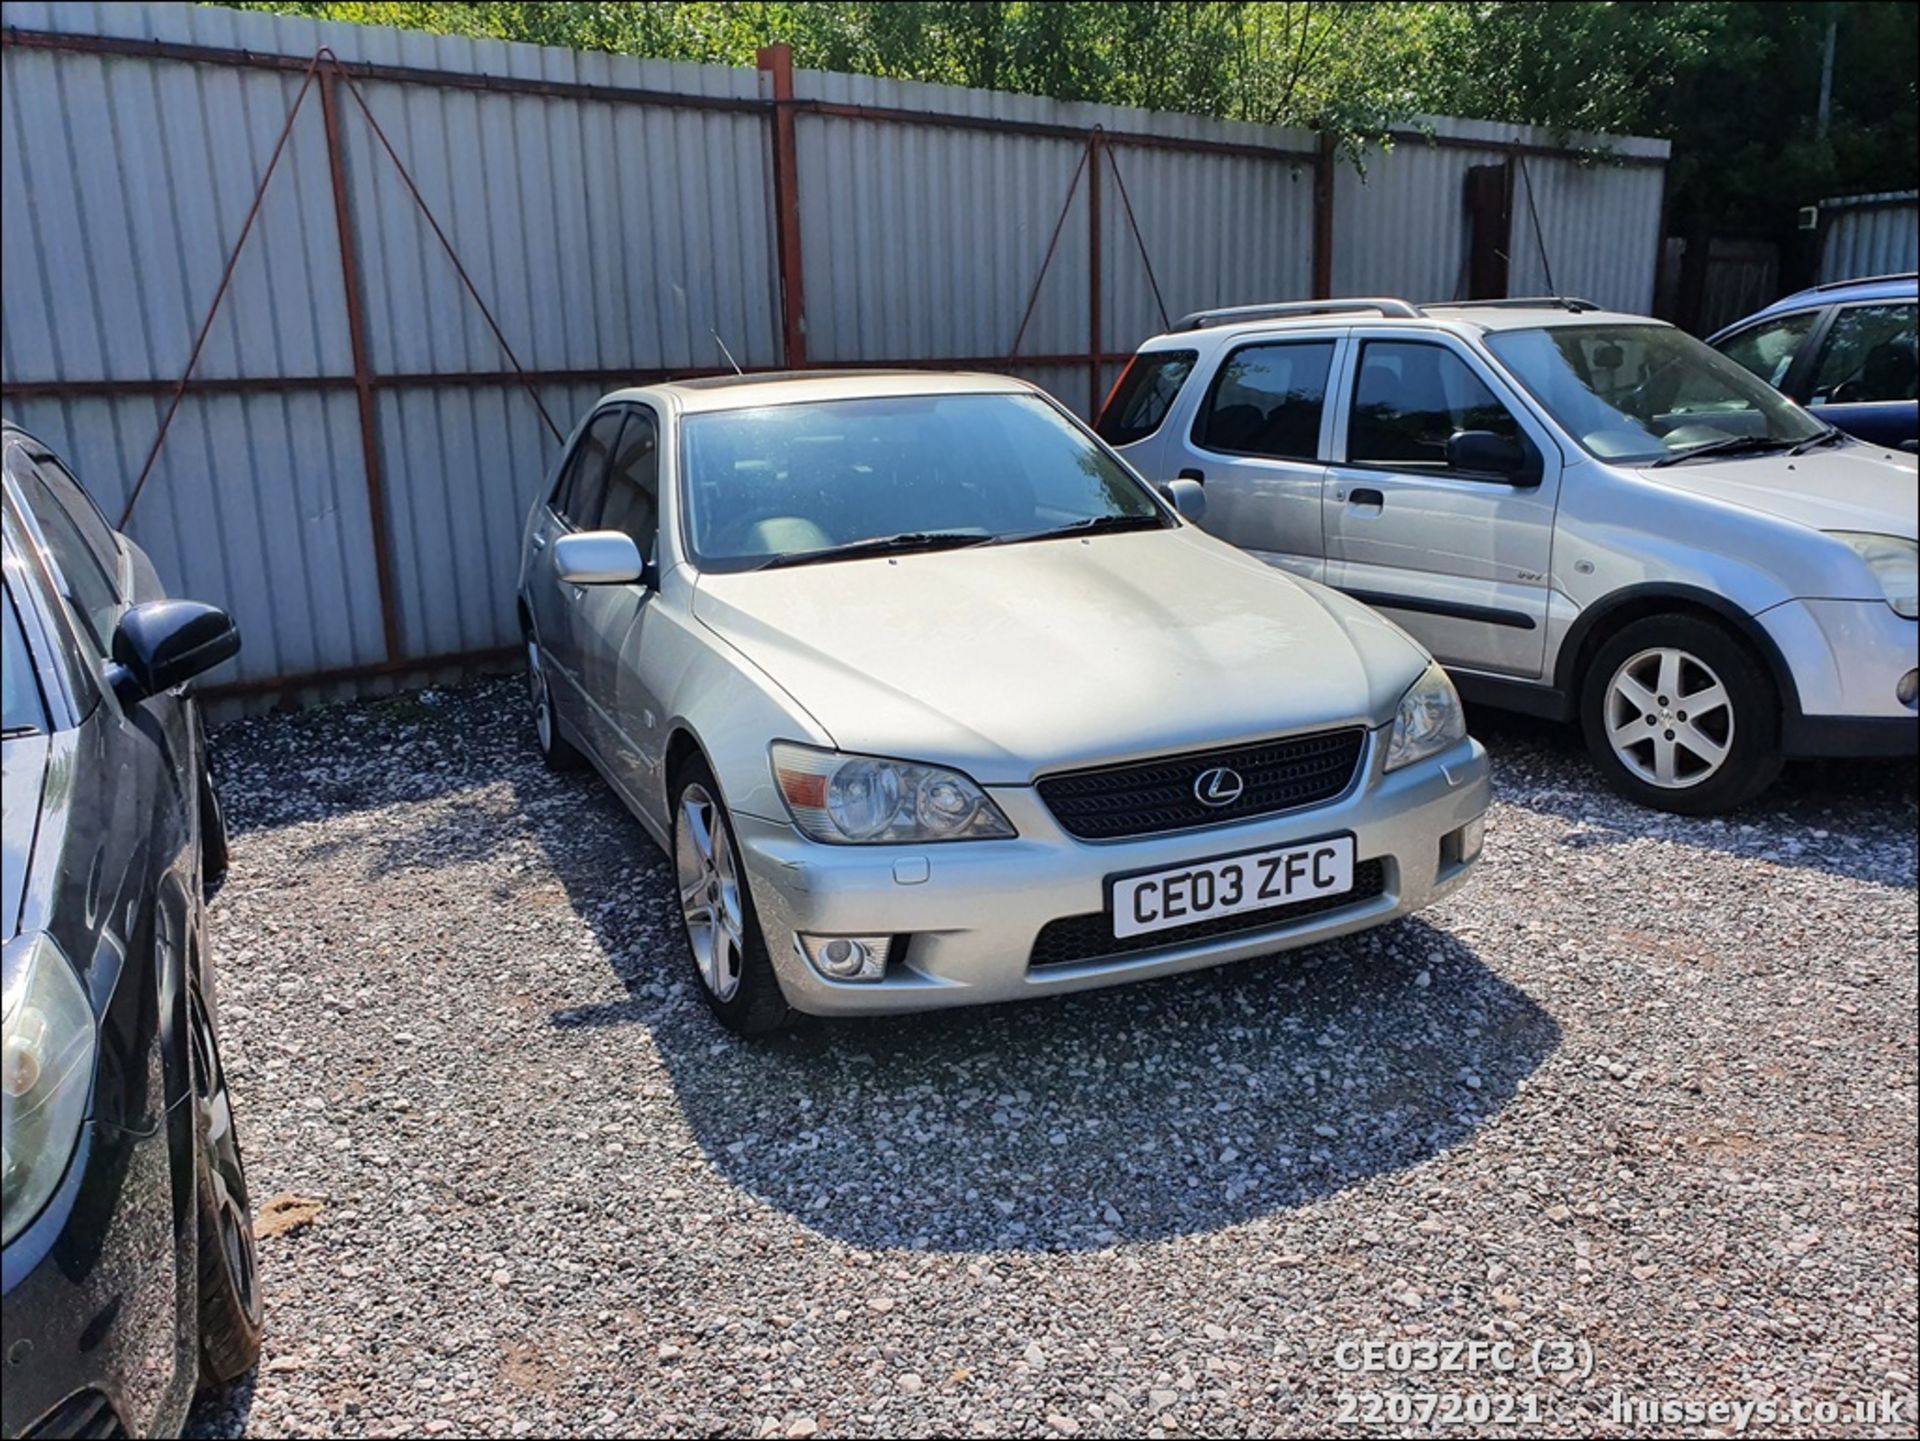 03/03 LEXUS IS200 SPORT - 1988cc 4dr Saloon (Silver) - Image 4 of 14